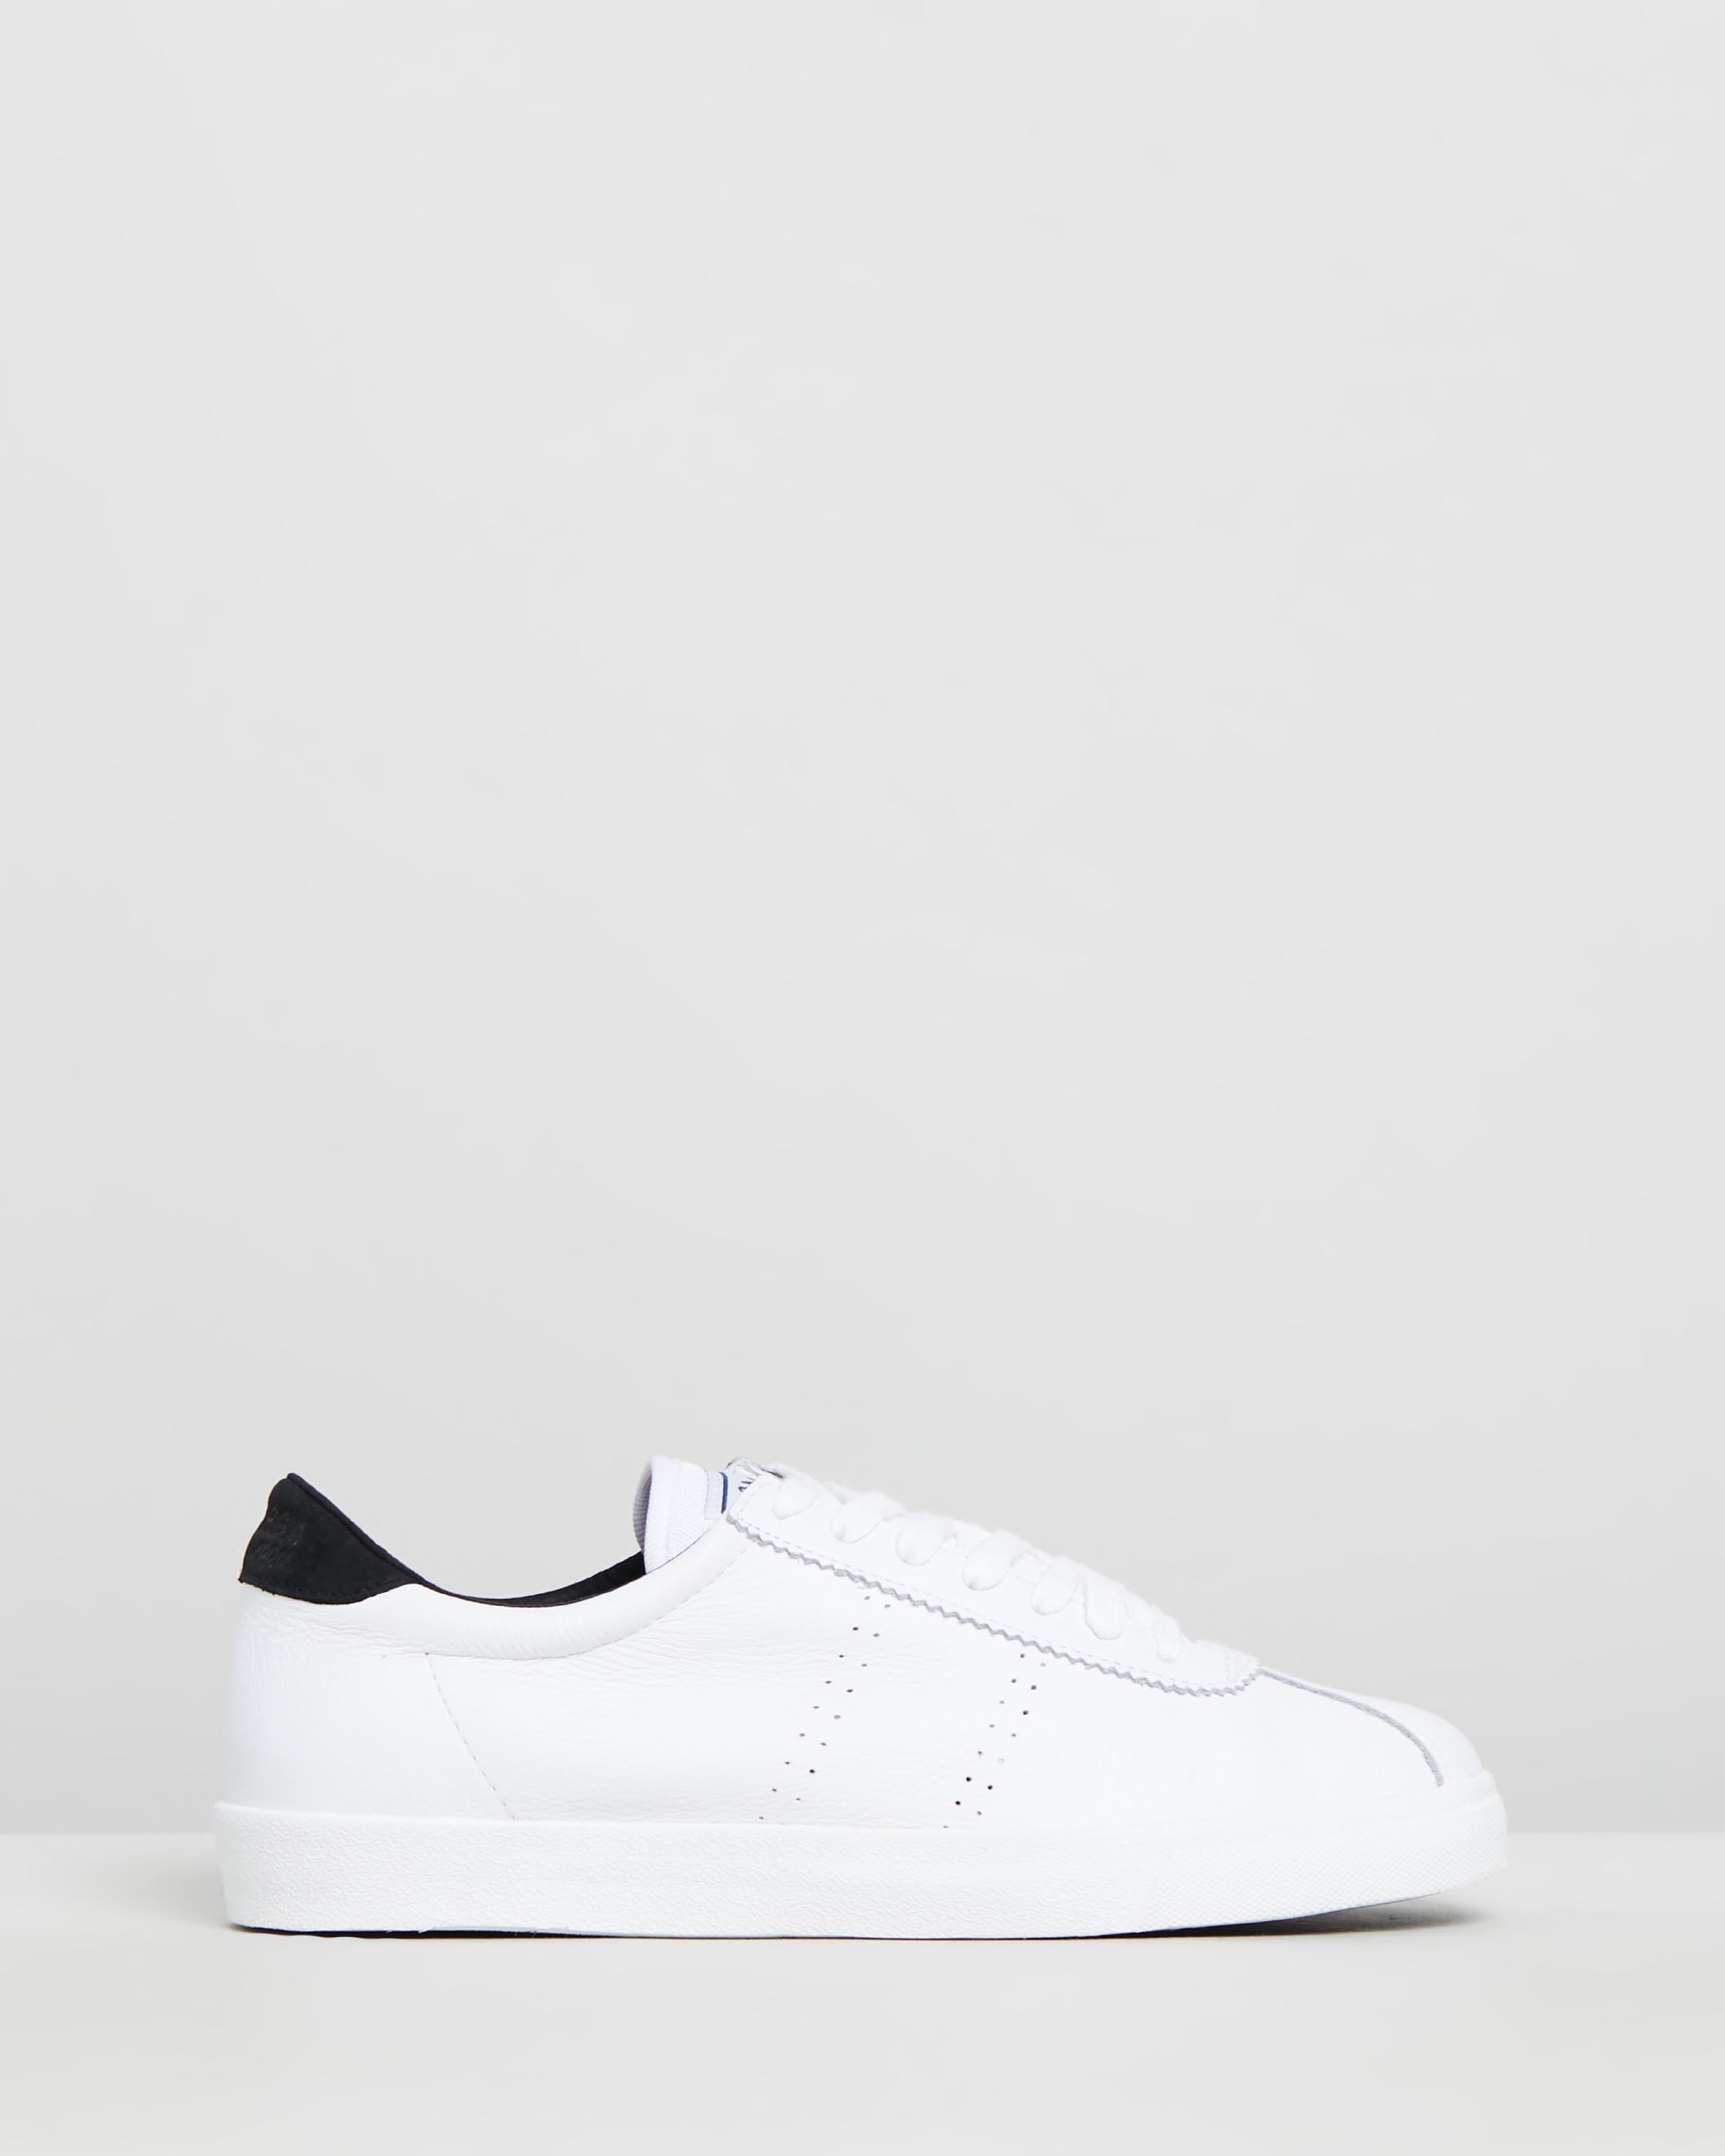 2843 Sport Club Sneakers - Unisex White & Black by Superga | ShoeSales